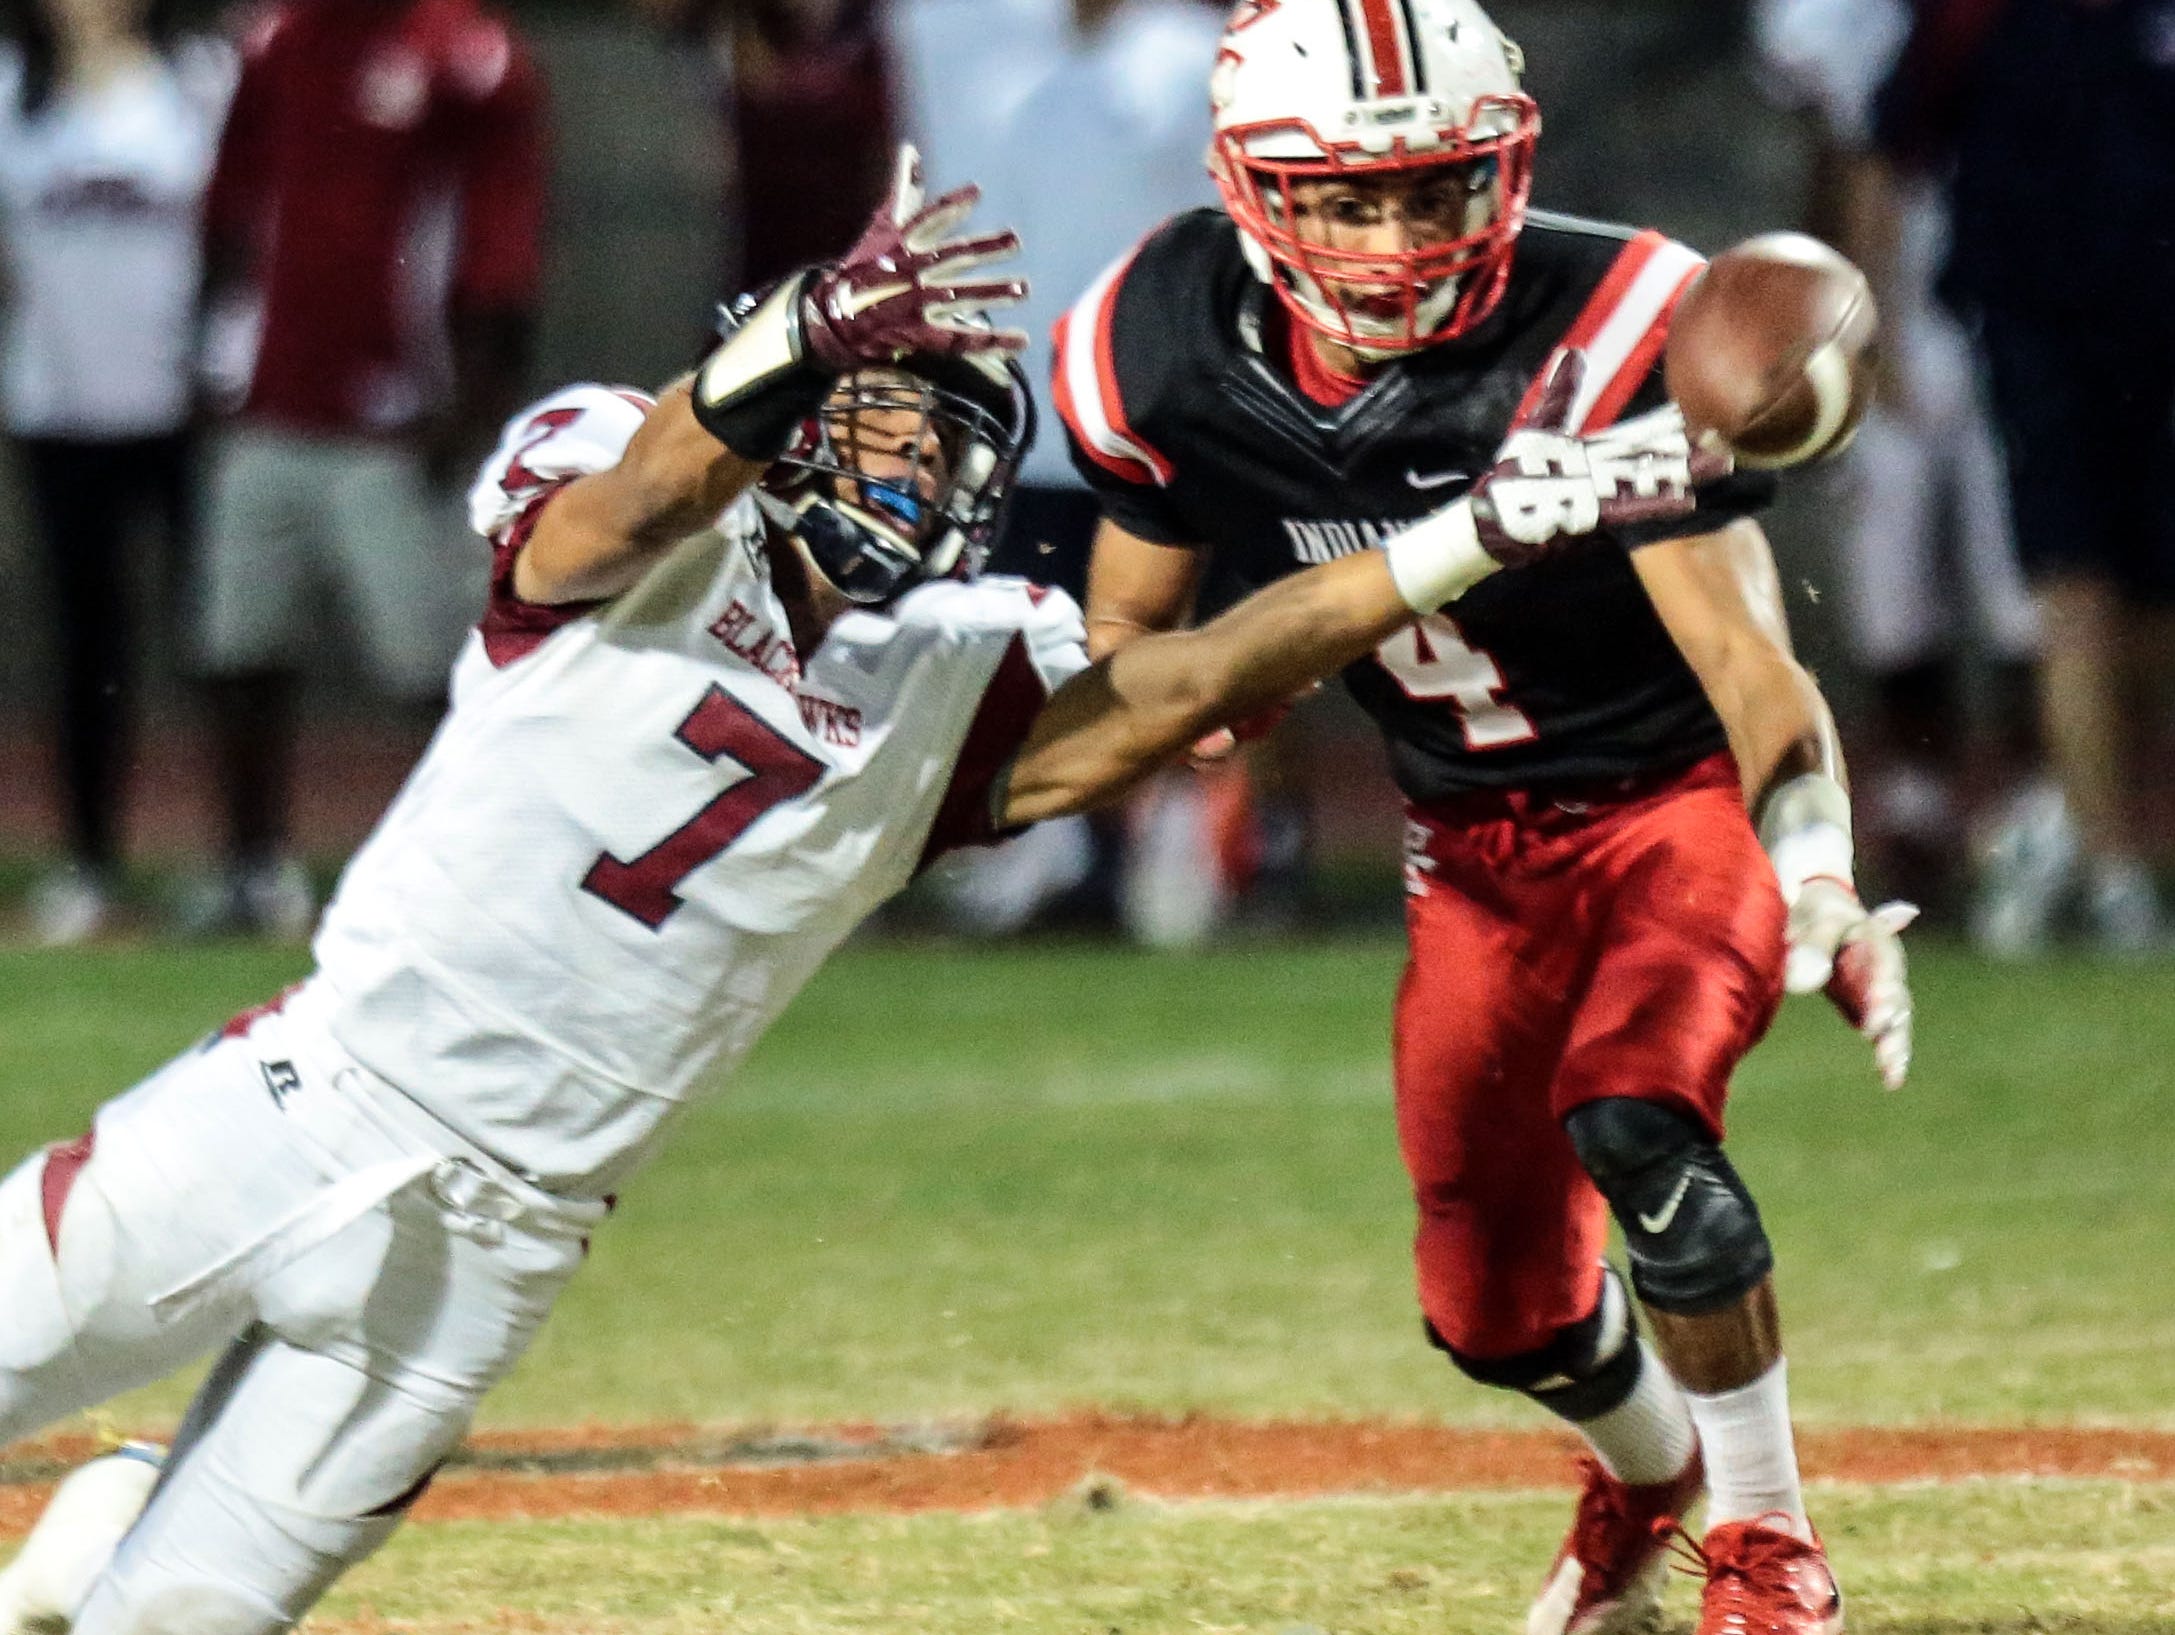 Palm Springs and La Quinta football action on Friday, September 30, 2016 in Palm Springs.